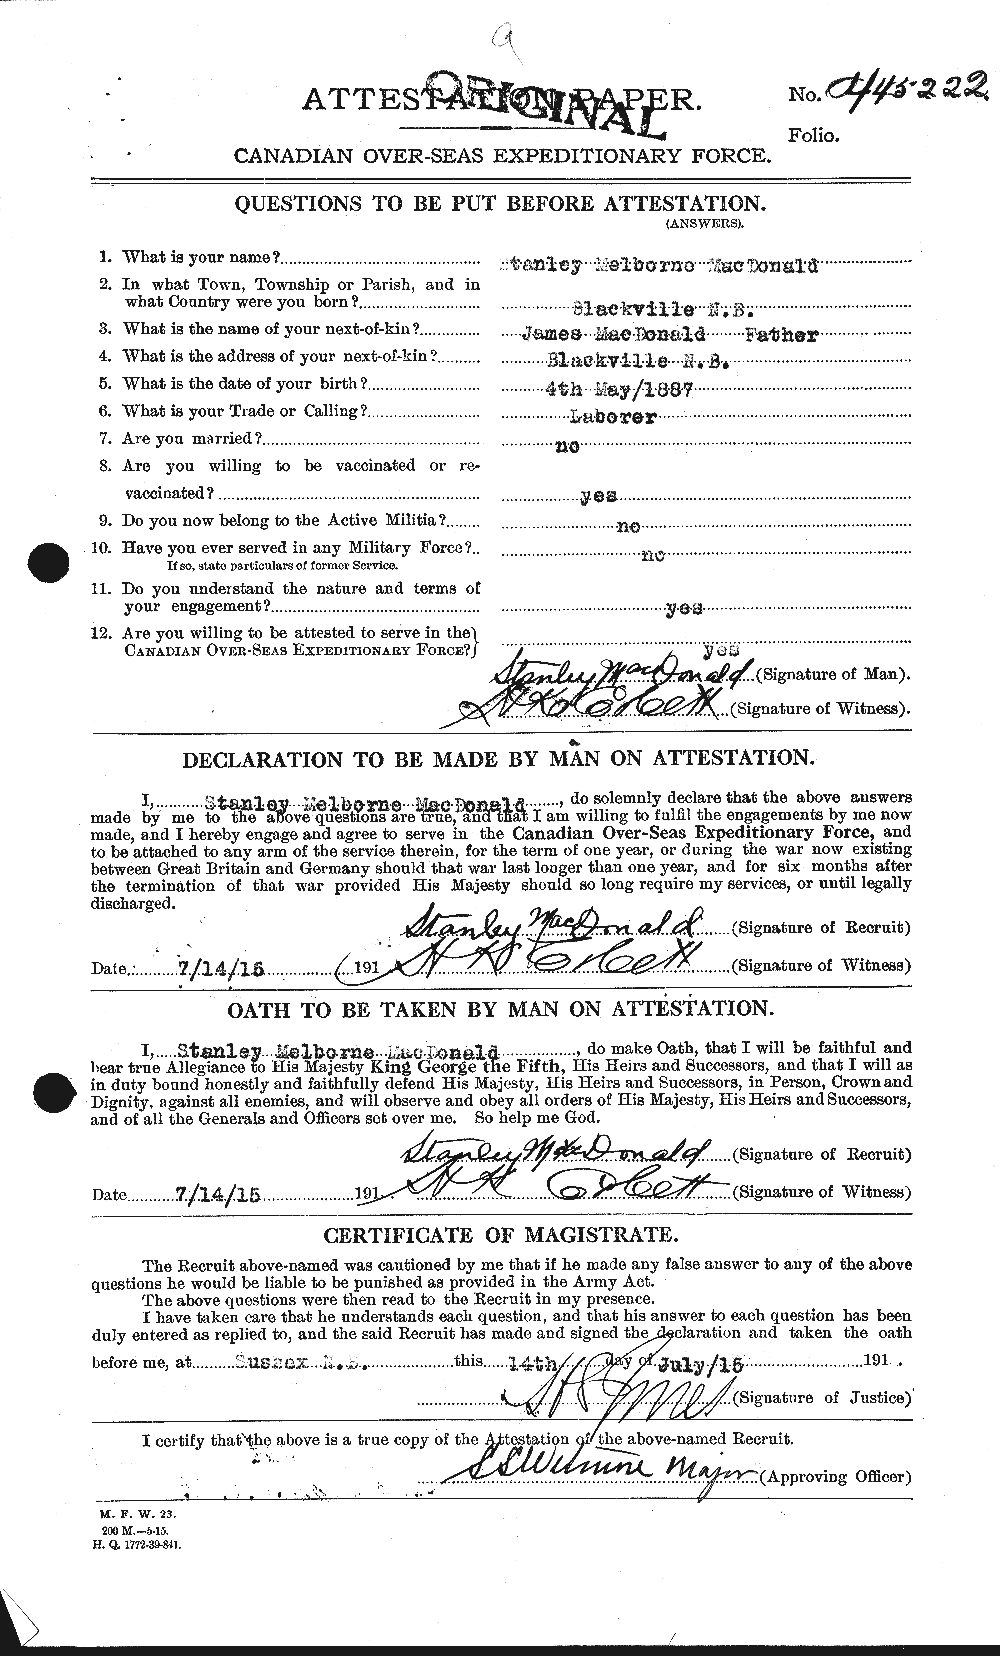 Personnel Records of the First World War - CEF 515913a